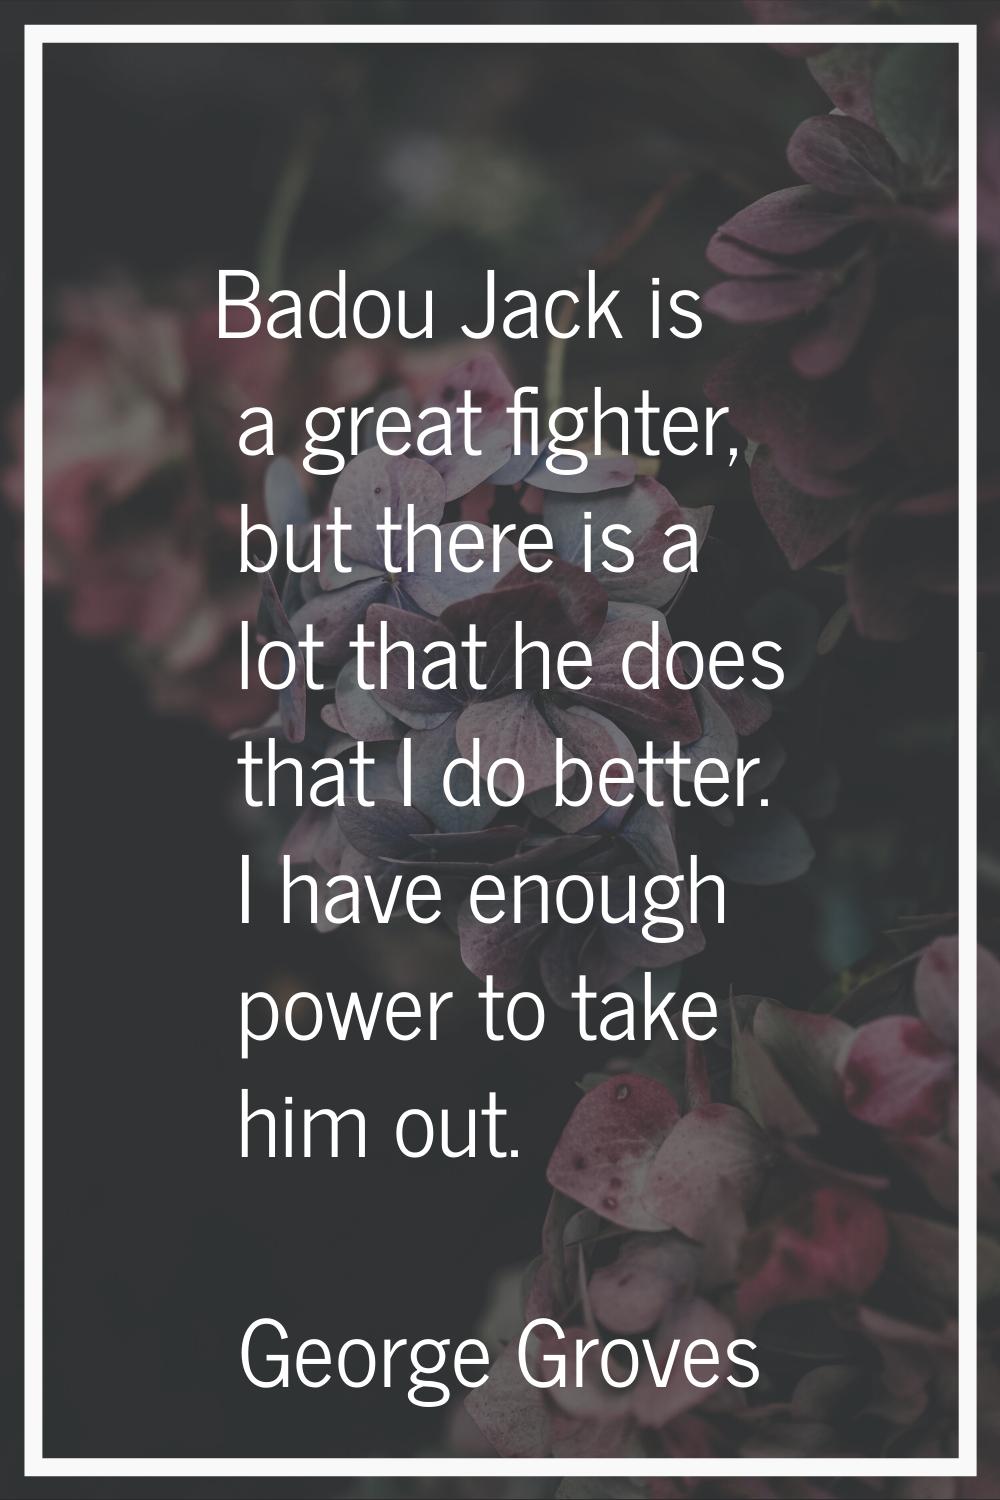 Badou Jack is a great fighter, but there is a lot that he does that I do better. I have enough powe